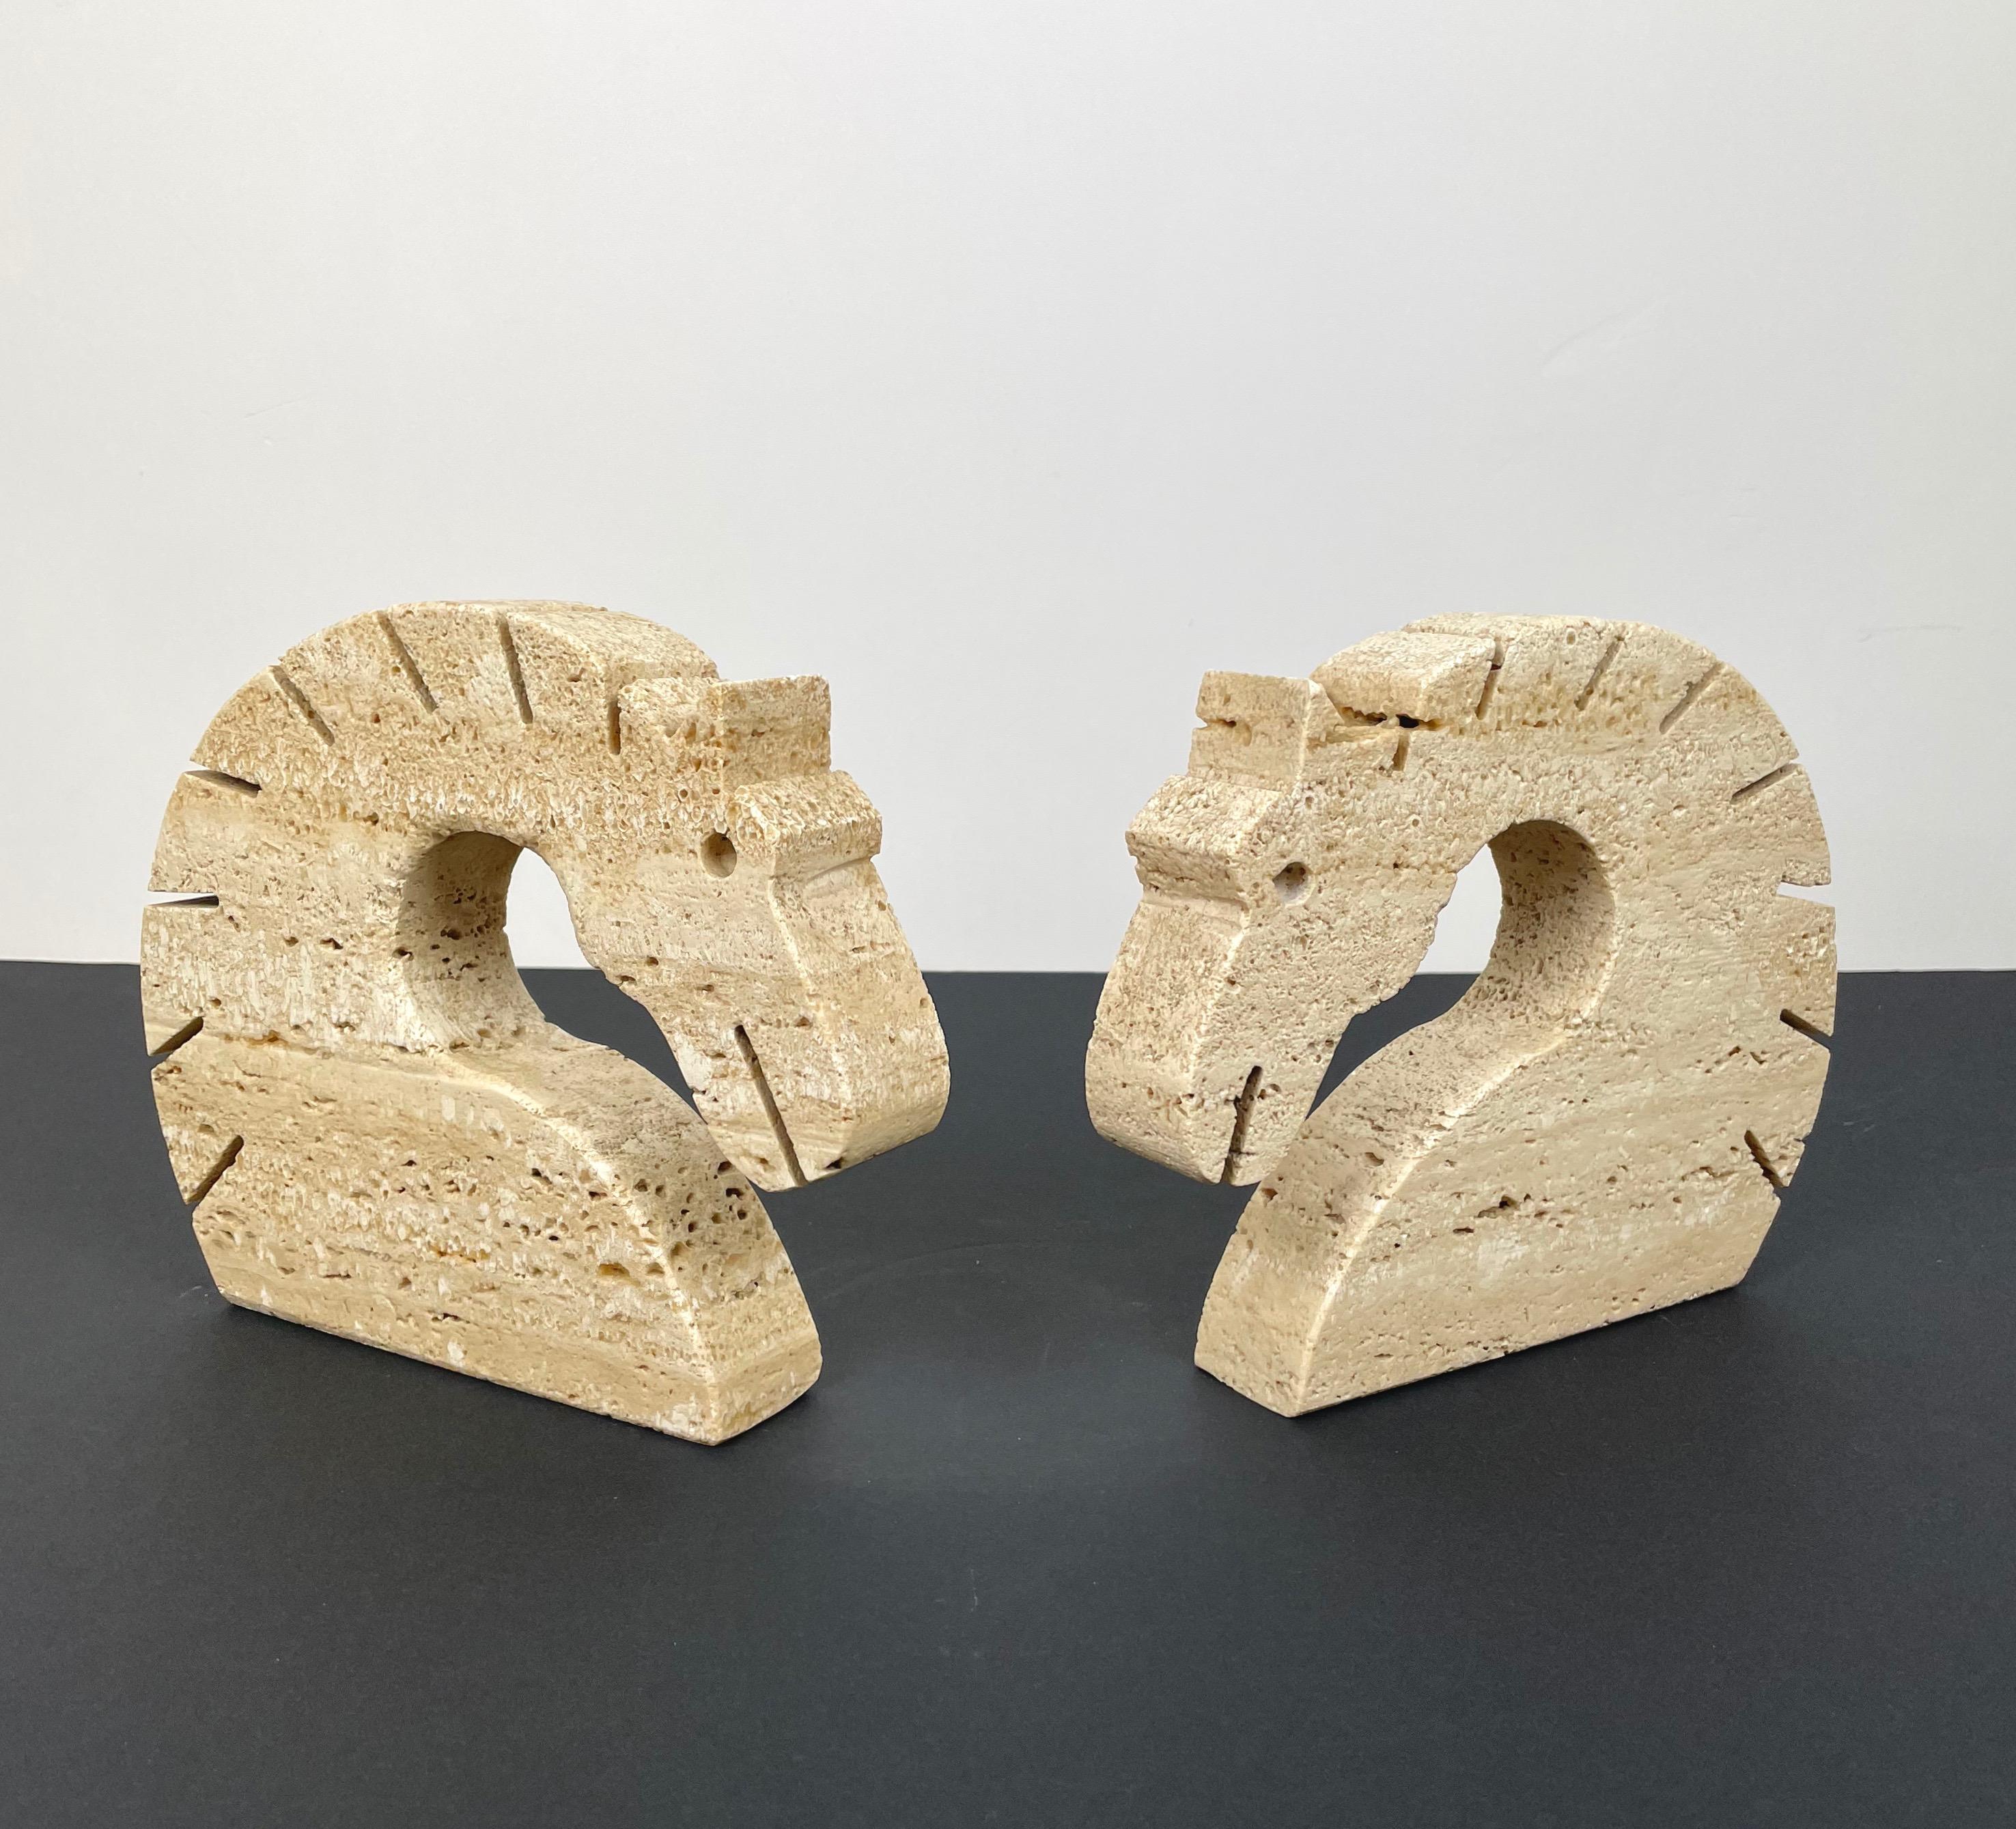 Pair of horse-shaped bookends and letter holders in travertine marble by the Italian designers Fratelli Mannelli, 1970s.